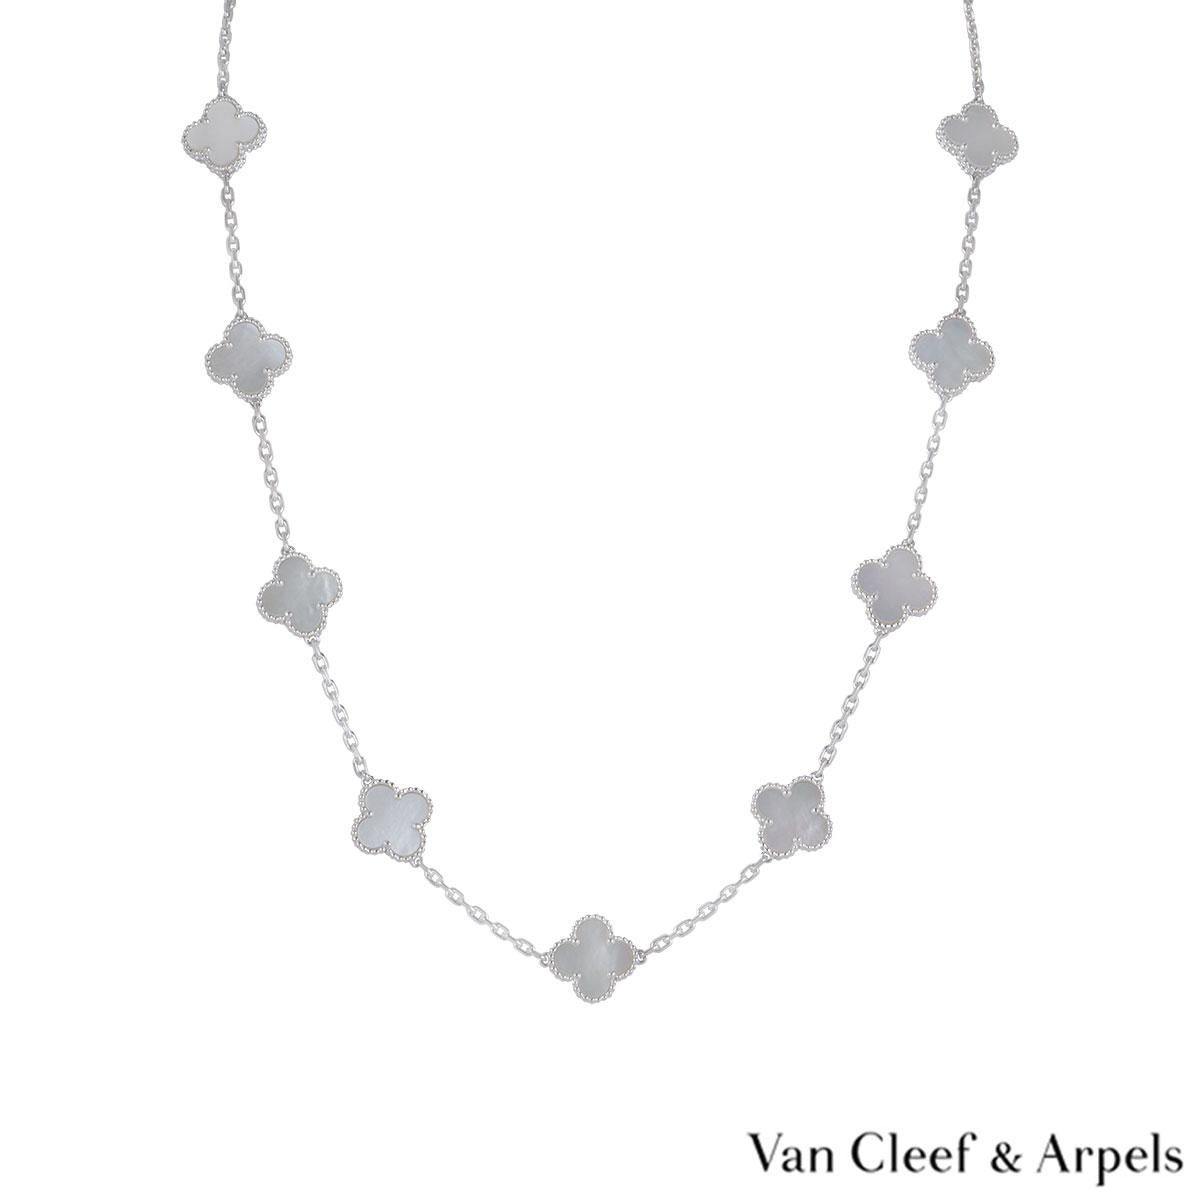 An 18k white gold necklace by Van Cleef & Arpels from the Vintage Alhambra collection. The necklace features 20 iconic 4 leaf clover motifs, each set with a beaded edge and a mother of pearl inlay, set throughout the length of the chain. The trace